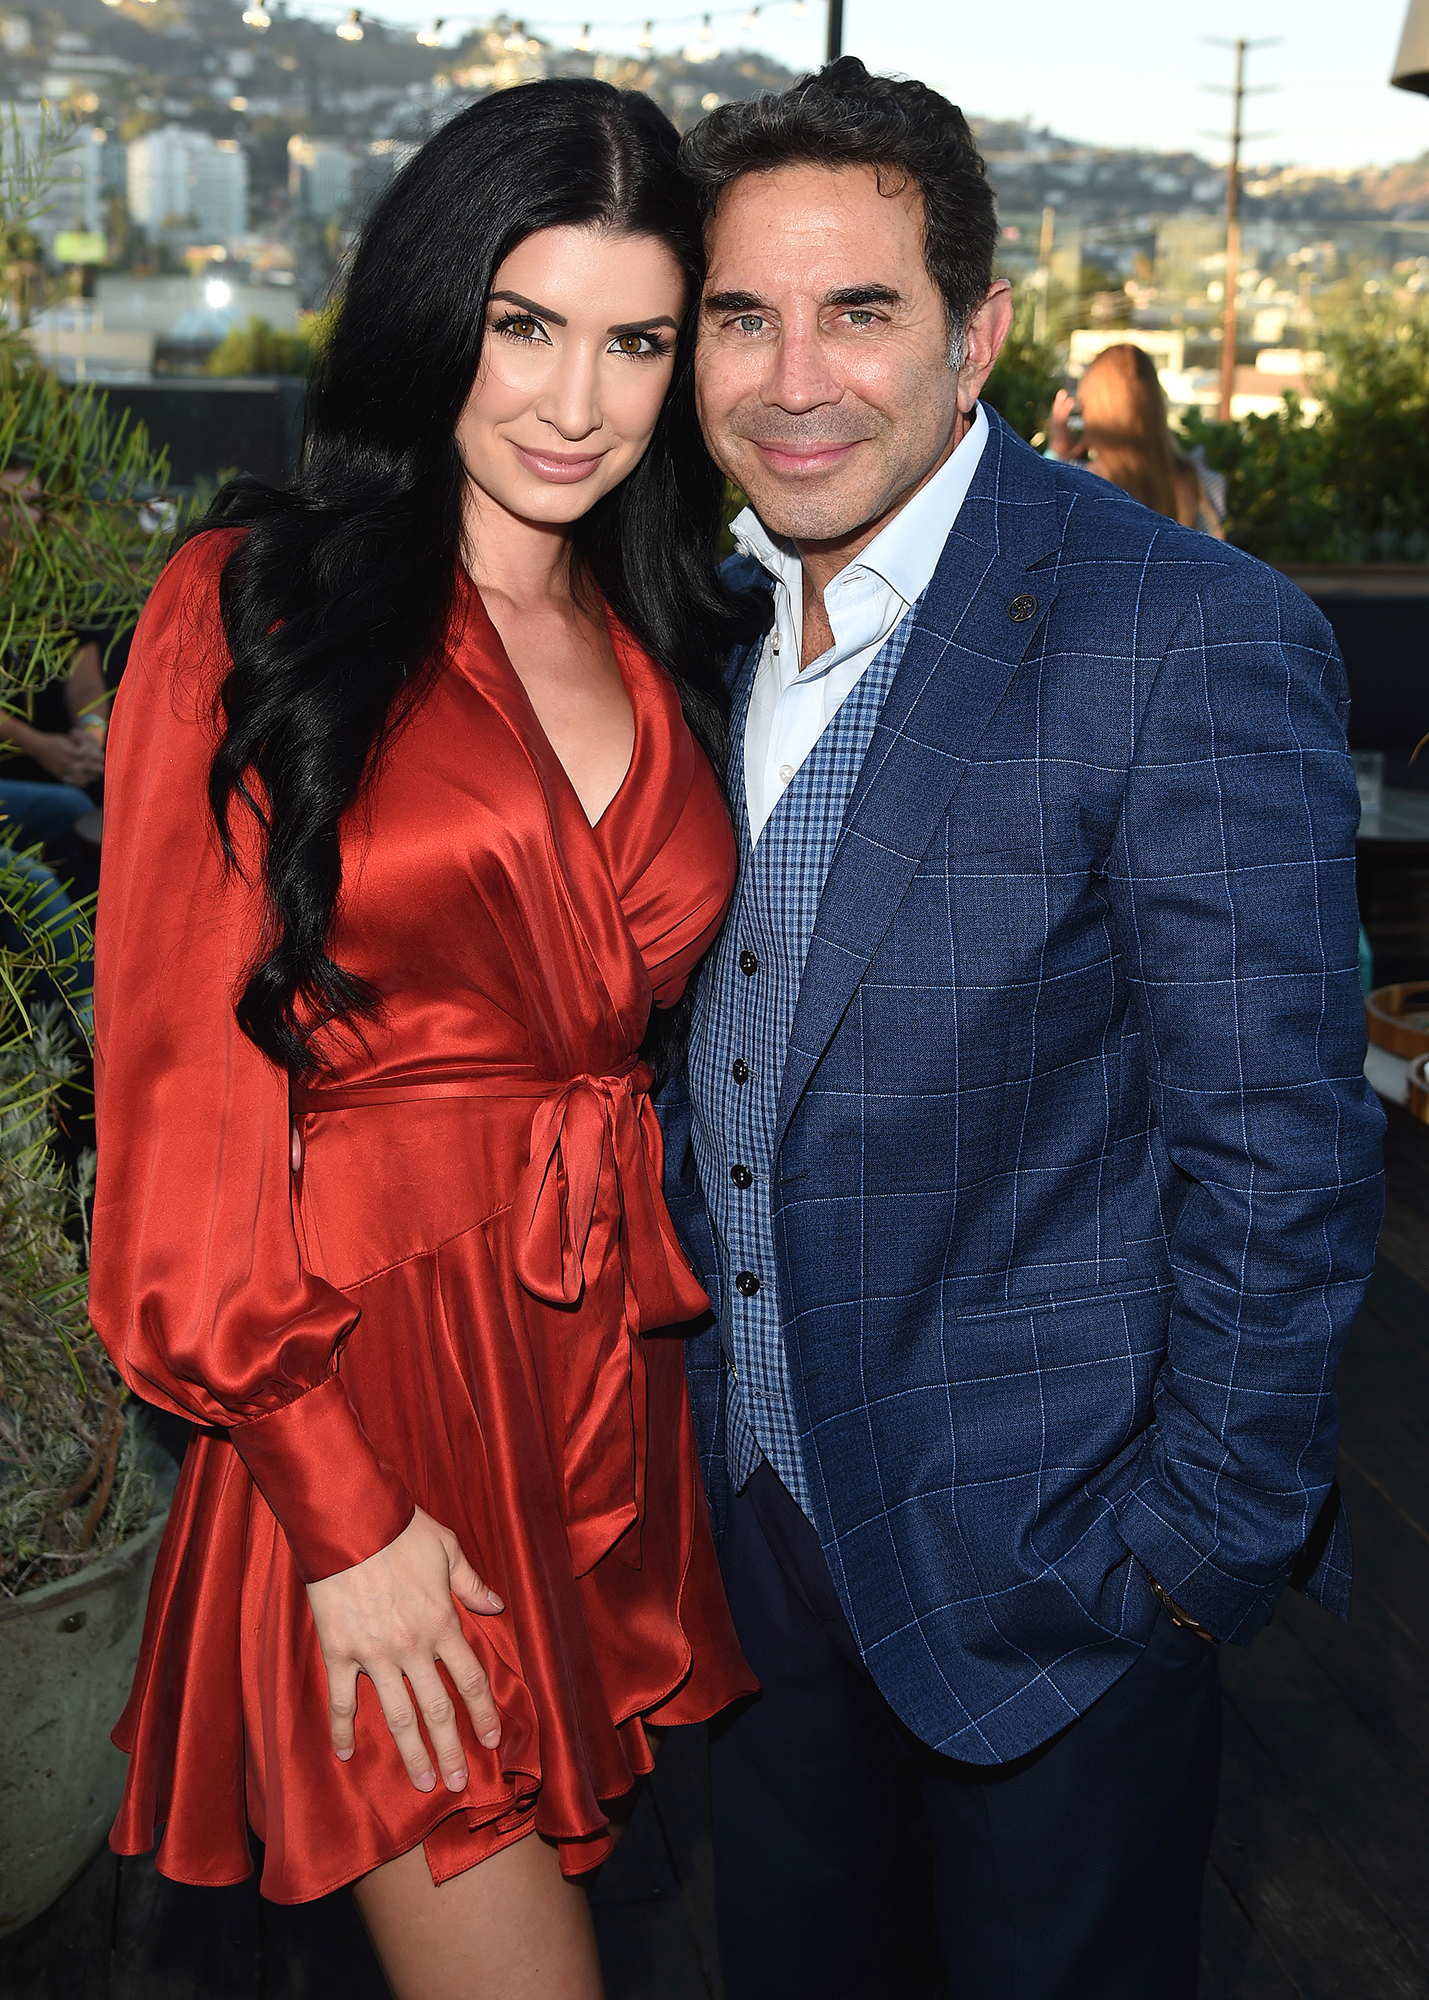 Botched's Paul Nassif, Wife Brittany Welcome 1st Child Together